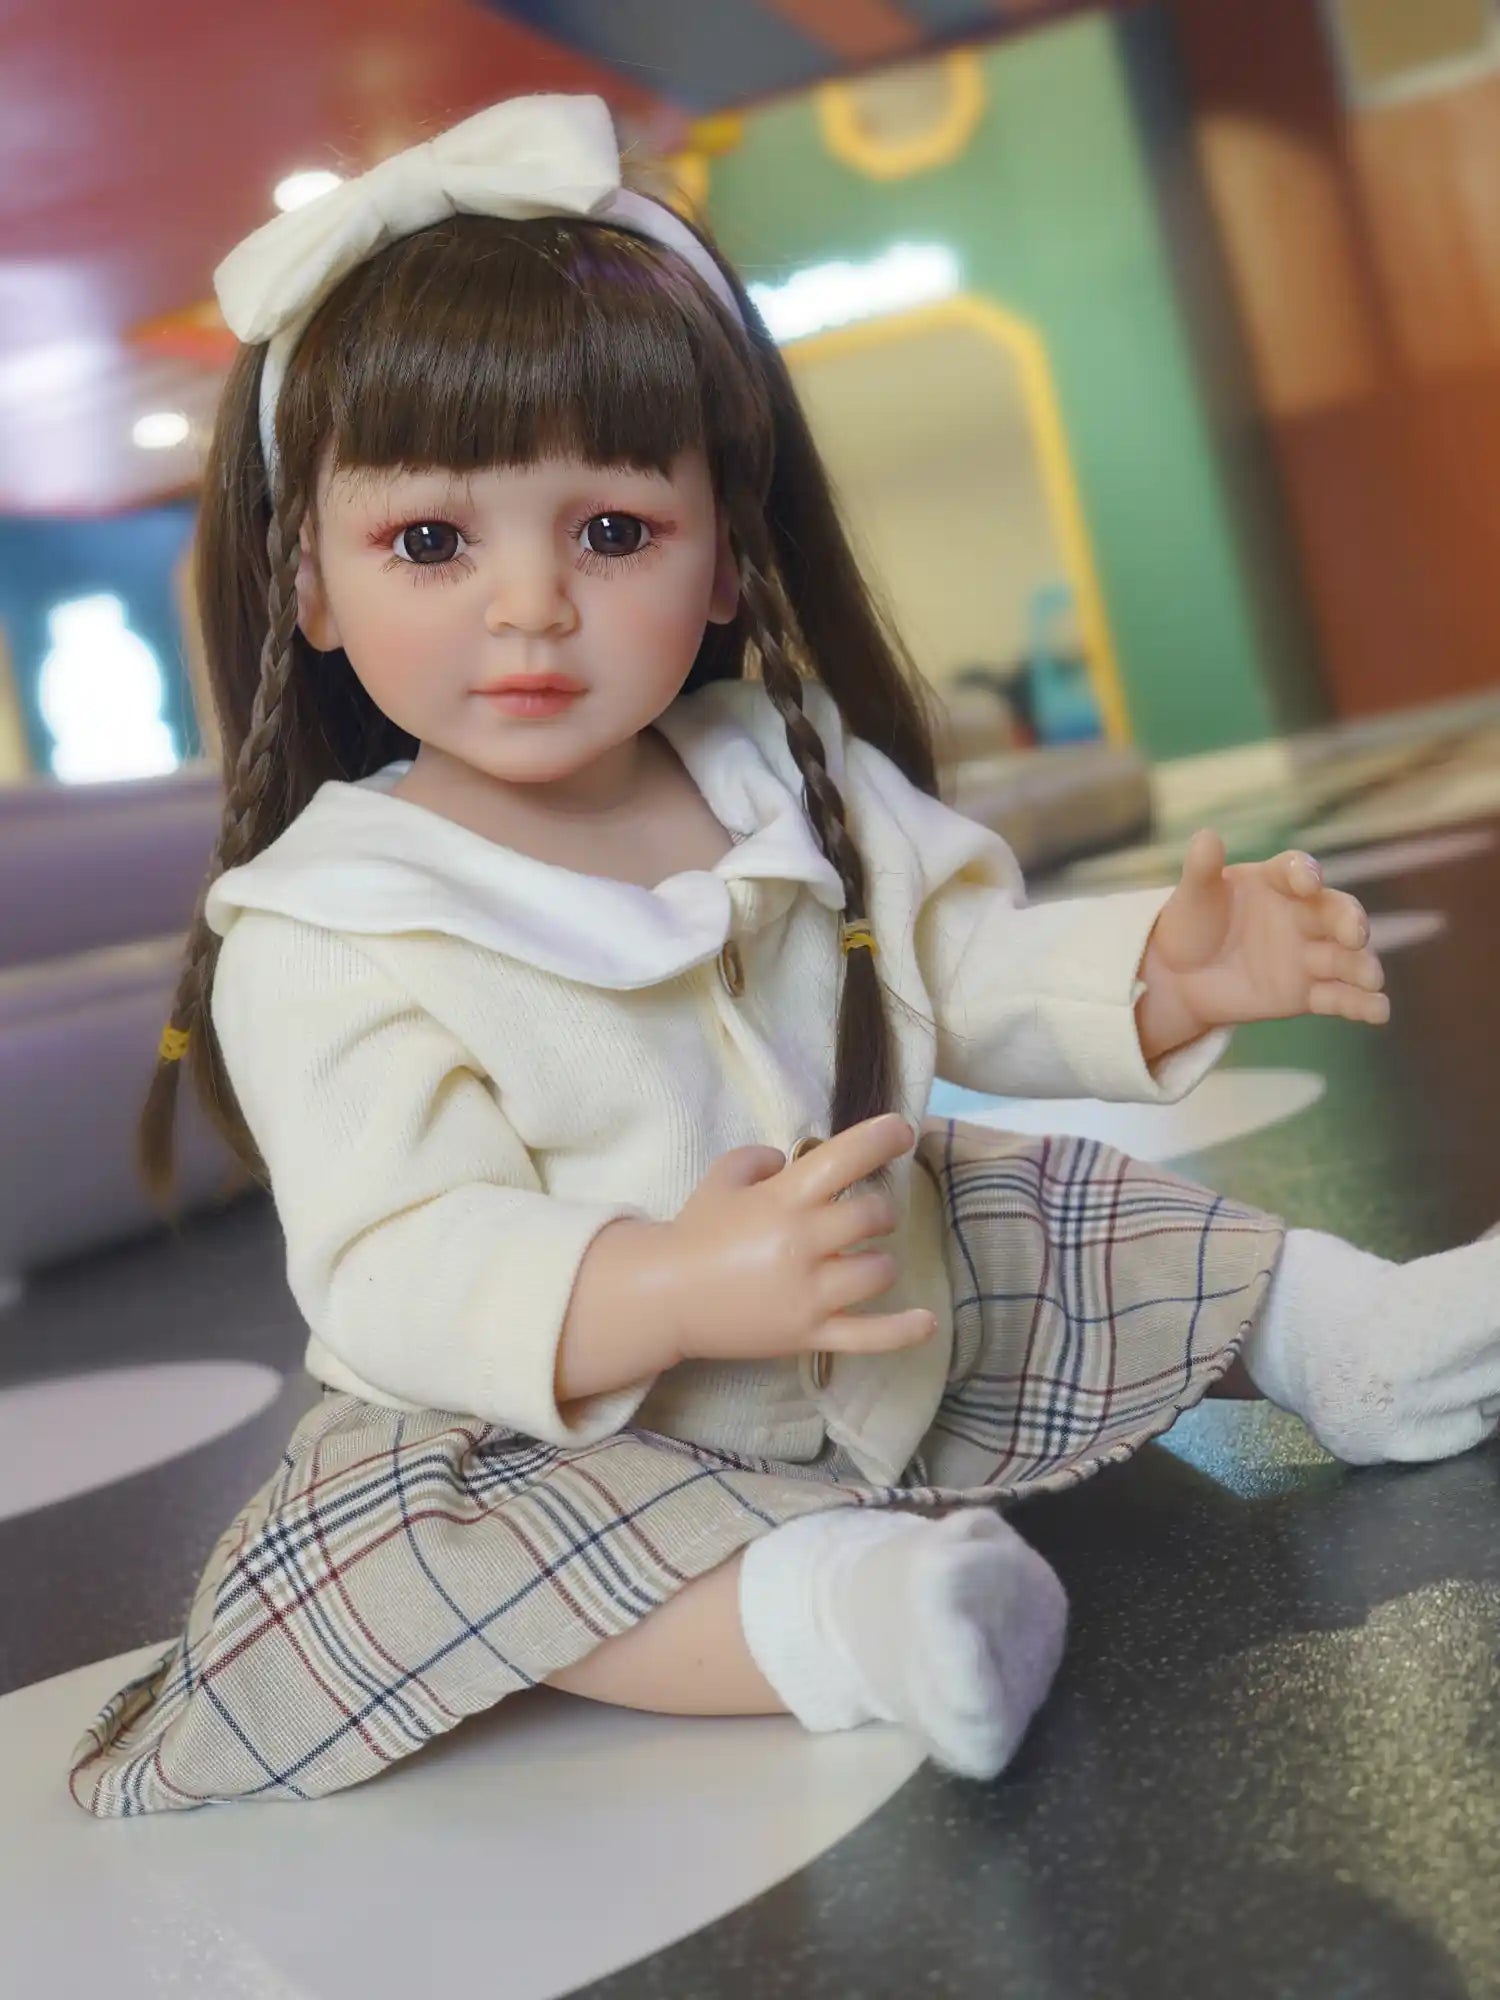 Realistic doll seated cross-legged with a gentle expression, in classic attire against a playful indoor backdrop.